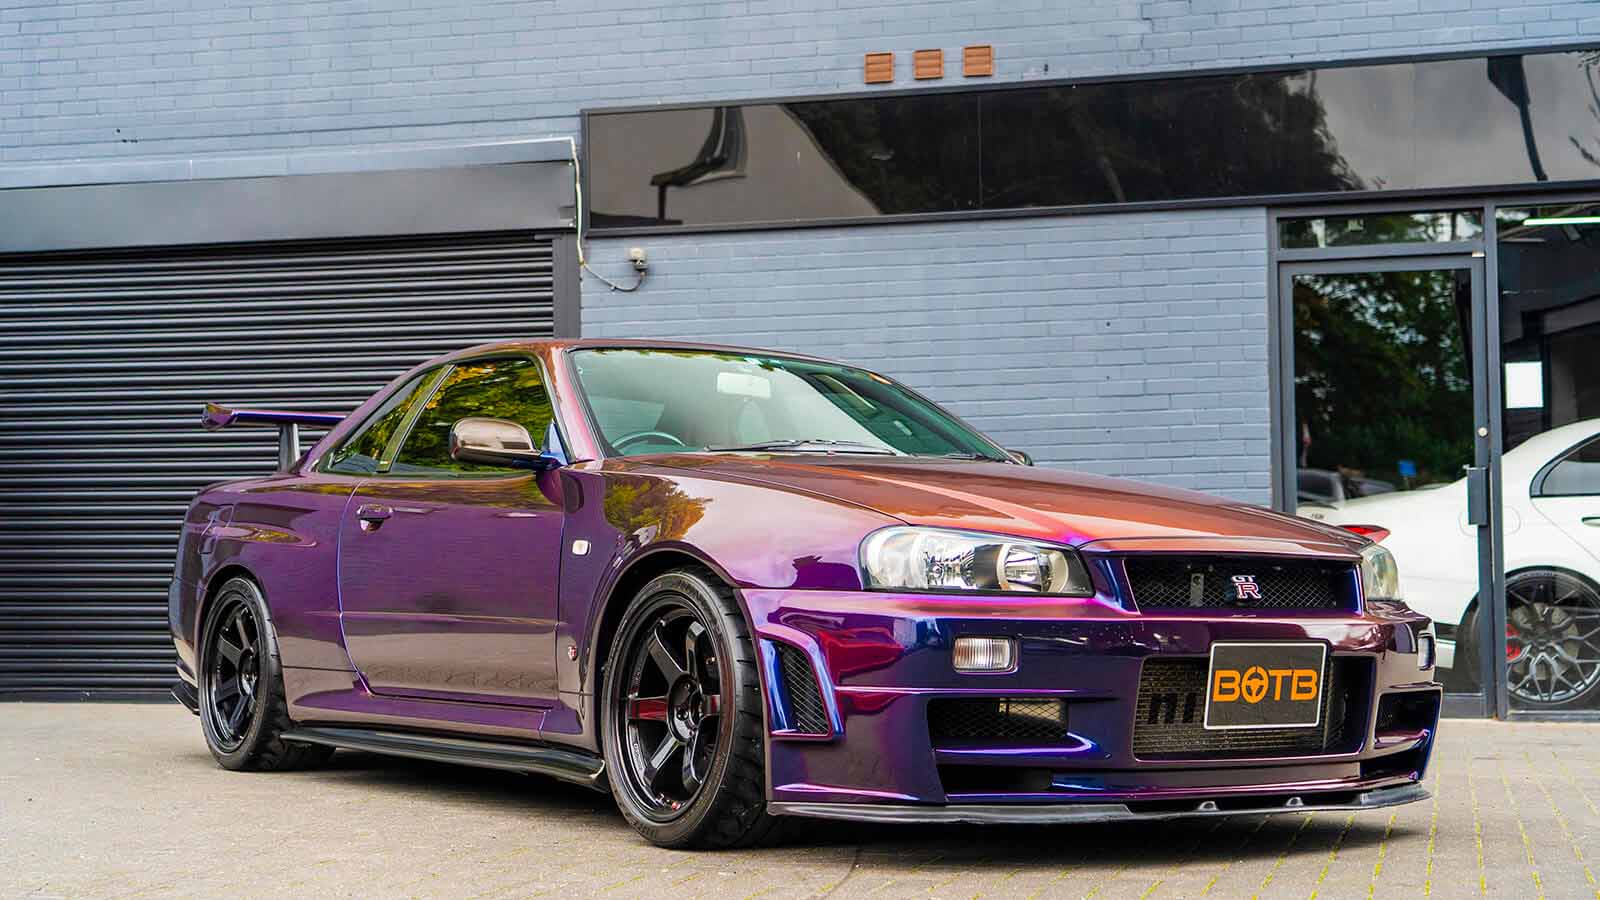 You Can Own an Iconic R34 Nissan Skyline GT-R V-Spec in the US